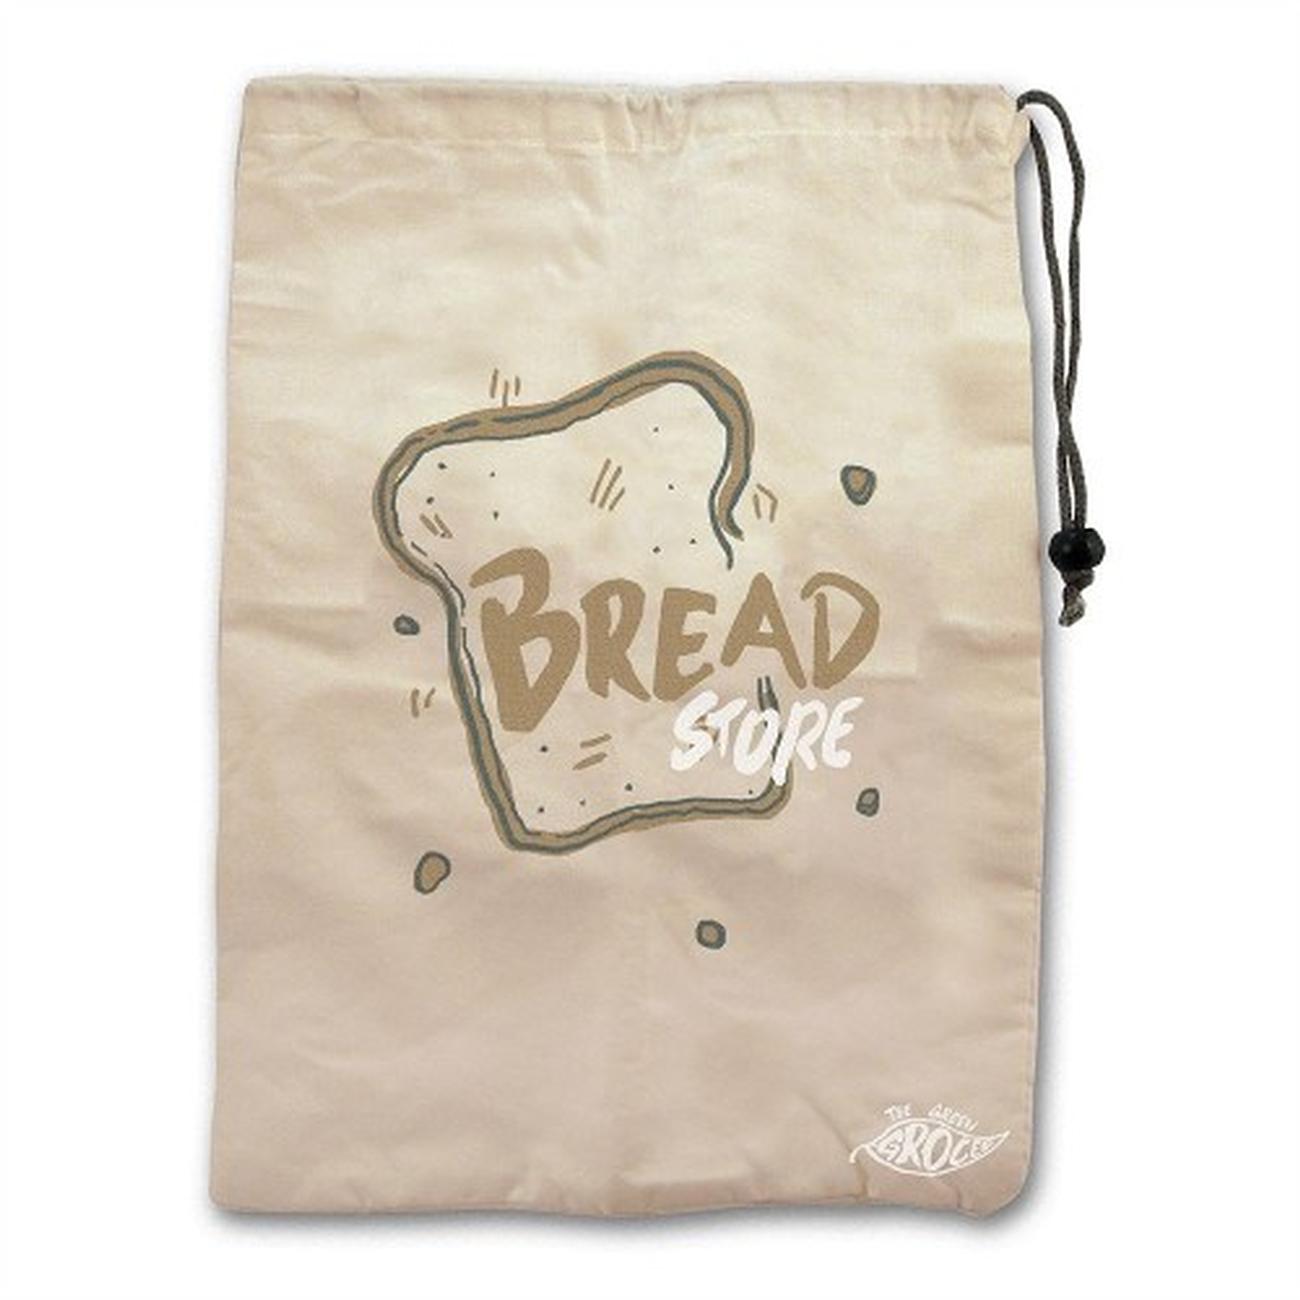 the-green-grocer-bread-store-bag - Green Grocer Bread Store